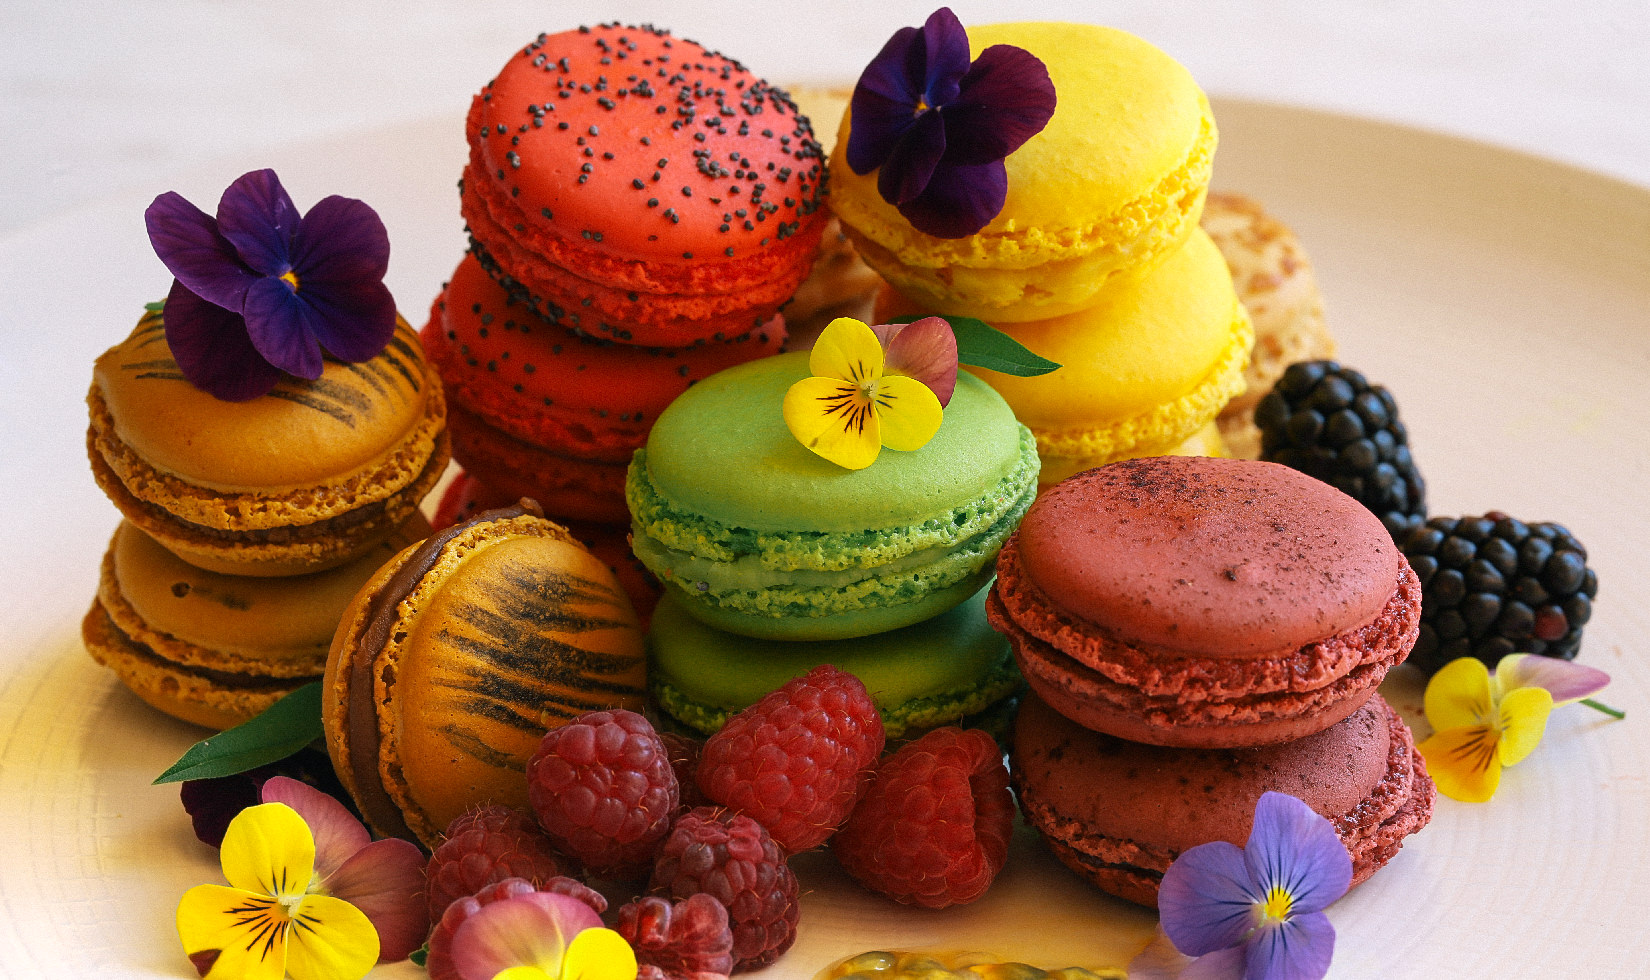 Different colors and designs of macarons with flowers, culinary arts, ready to eat. 